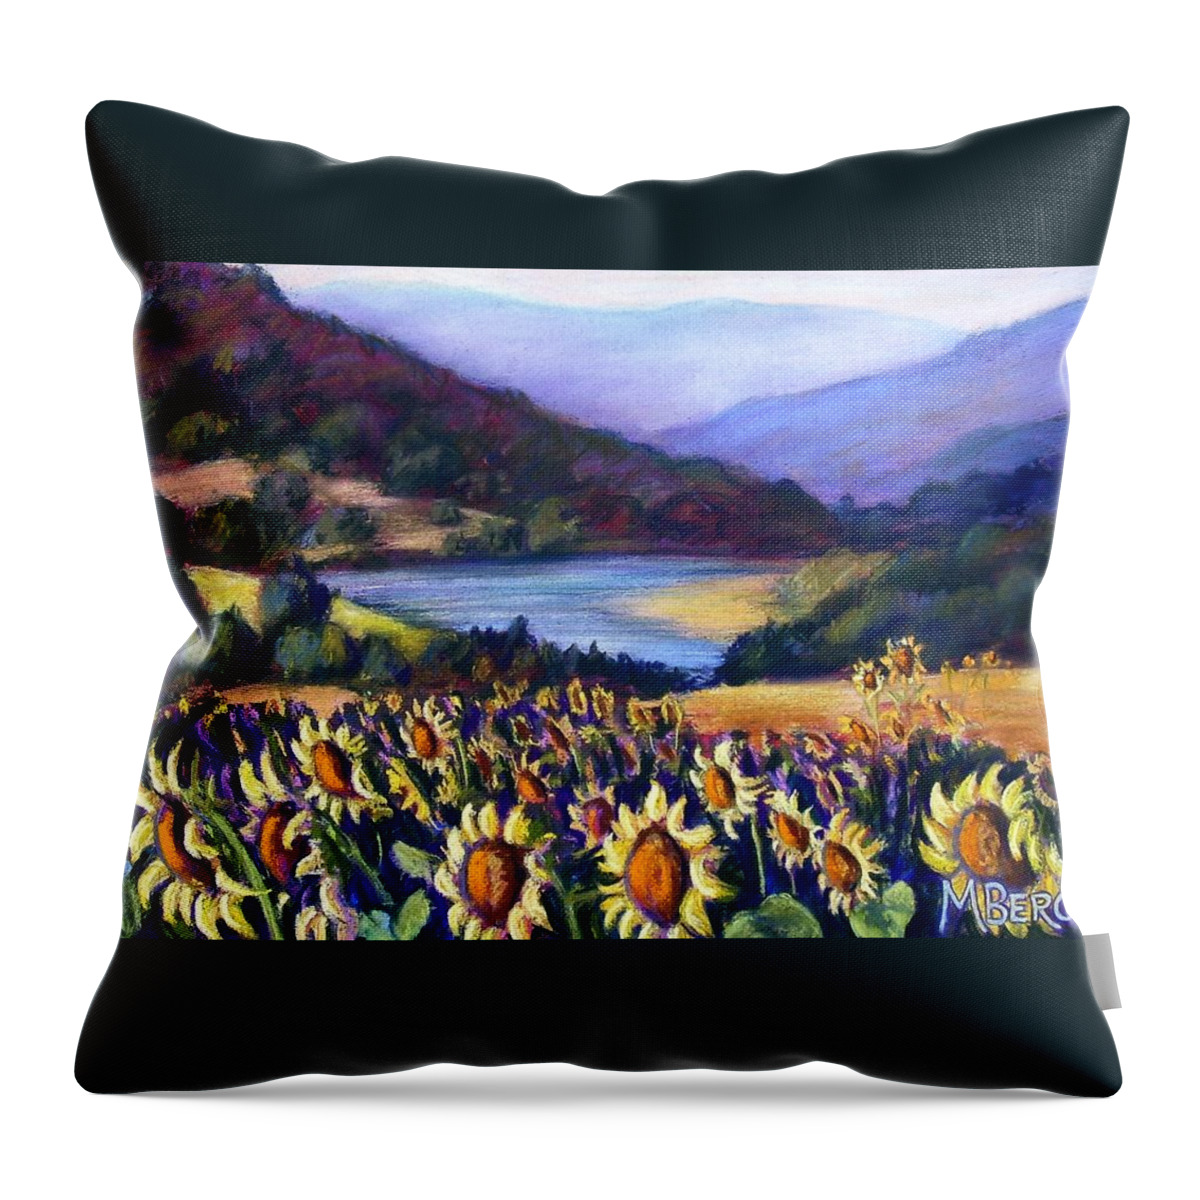 Pastel Throw Pillow featuring the painting Italian Sunflowers by Marian Berg